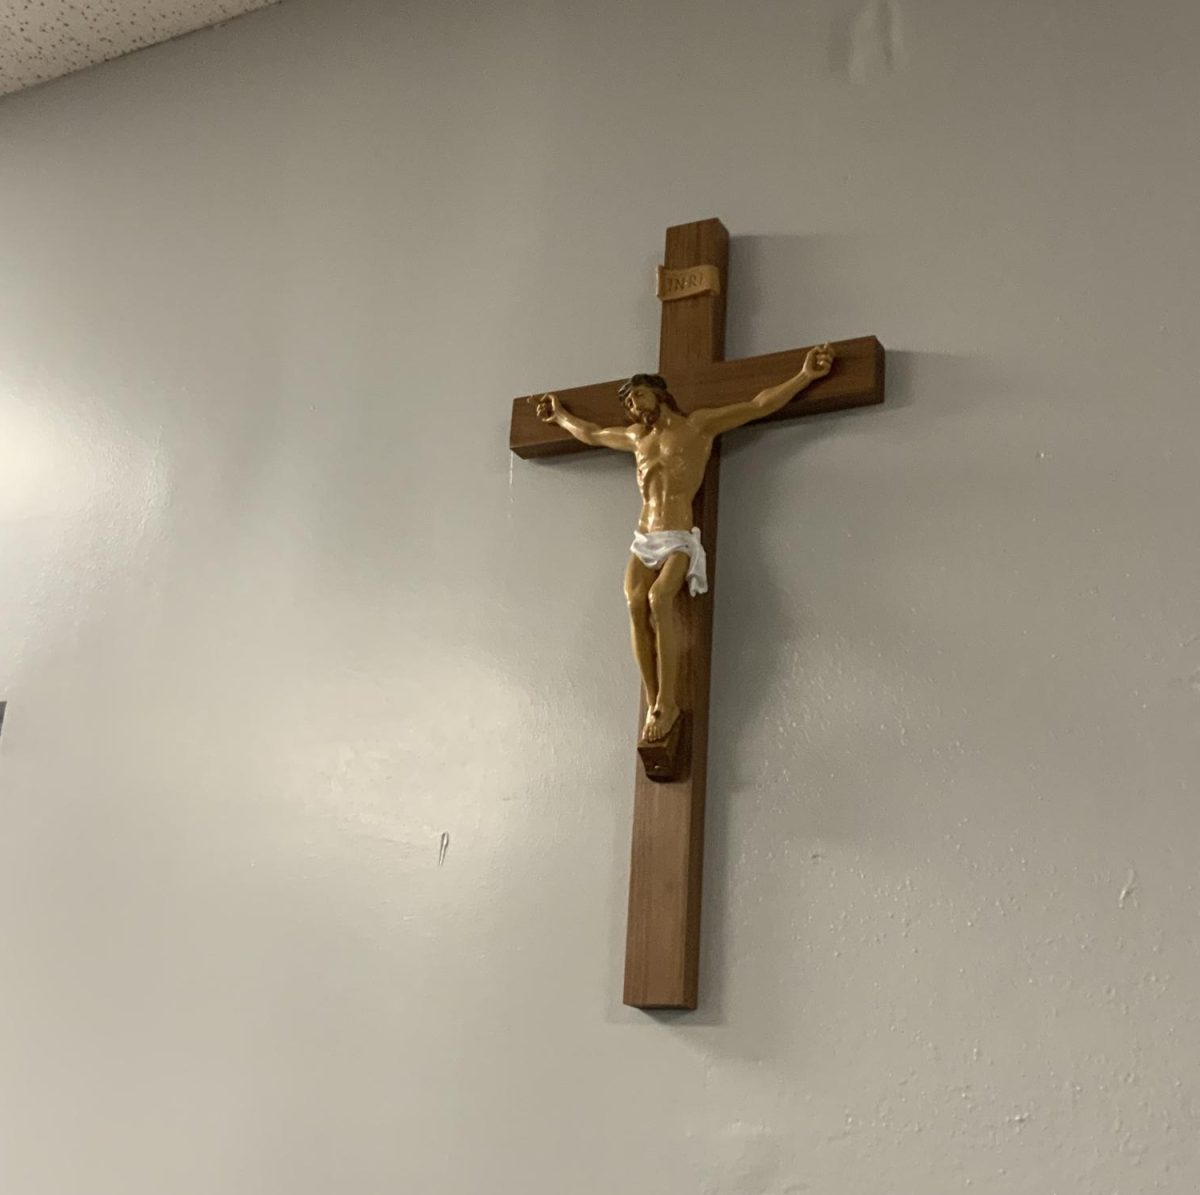 This crucifix, like the many in different areas of the ILS campus, is located in the SLC.